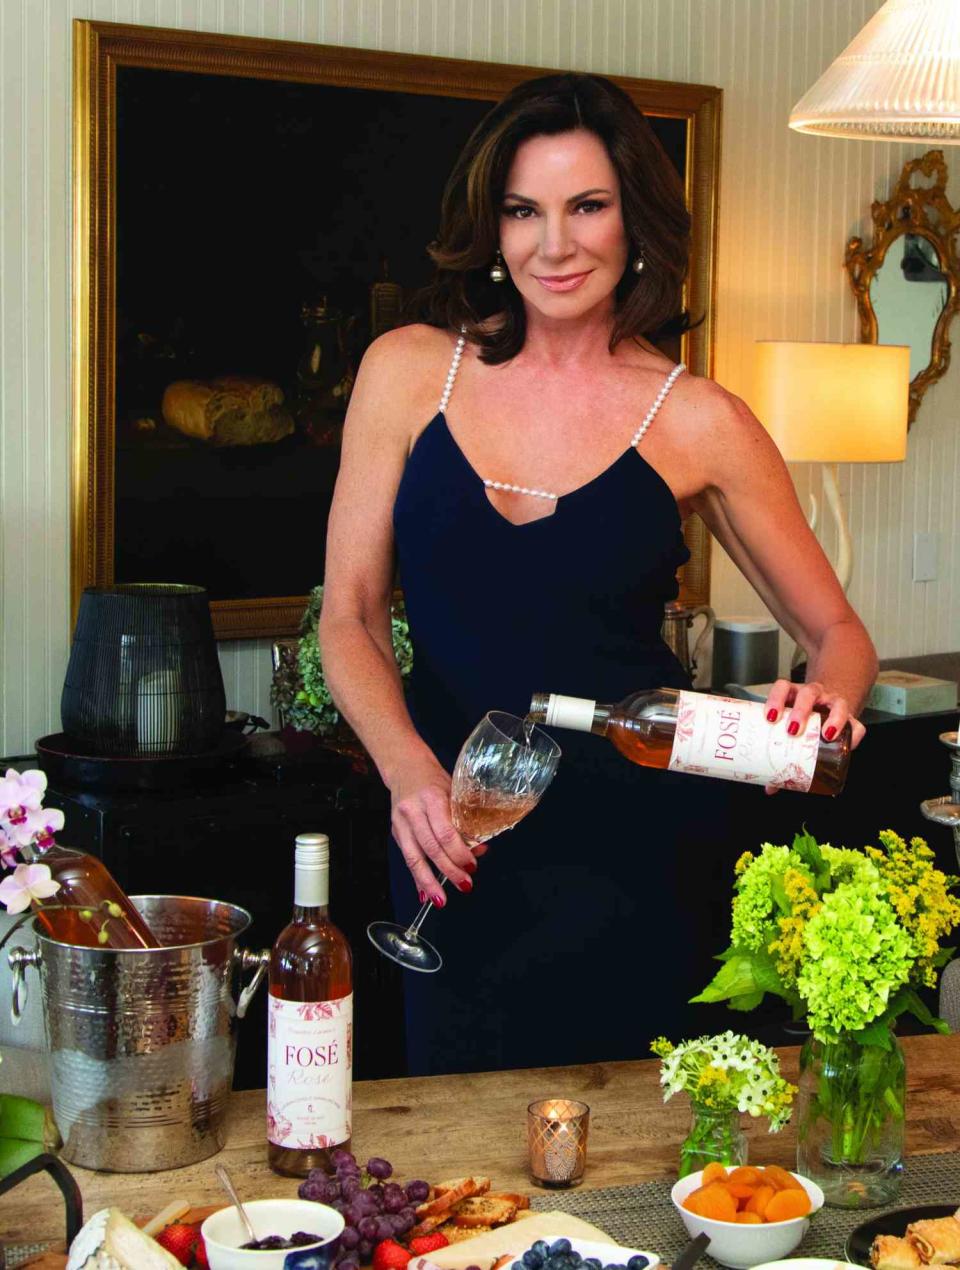 <p><strong>Fosé Rosé Wine</strong></p> <p>When the<a href="https://people.com/tv/luann-de-lesseps-on-rhony-potential-cast-shakeup/" rel="nofollow noopener" target="_blank" data-ylk="slk:Real Housewives of New York City" class="link "><em> Real Housewives of New York City</em></a> star started <a href="https://people.com/tv/rhony-luann-de-lesseps-says-shes-sober-again-after-covid-19/" rel="nofollow noopener" target="_blank" data-ylk="slk:her journey to sobriety" class="link ">her journey to sobriety</a>, she was looking for a non-alcoholic option that did not have too much sugar nor sacrifice flavor. De Lesseps "wanted to make something that was like rosé, that tasted like rosé, that is an elevated sparkling rosé but without alcohol," she <a href="https://people.com/food/luann-de-lesseps-talks-new-non-alcoholic-rose-sobriety-journey-ive-grown-so-much/" rel="nofollow noopener" target="_blank" data-ylk="slk:told PEOPLE." class="link ">told PEOPLE.</a> She says her Fosé Rosé non-alcoholic sparkling wine is "the closest you can get to a rosé, without actually drinking rosé." </p> <p><strong>Buy It!</strong> Fosé Rosé, $38 for 2 bottles; <a href="https://drinkfose.com/products/countess-luann-s-fose-rose-2-bottles" rel="nofollow noopener" target="_blank" data-ylk="slk:drinkfose.com" class="link ">drinkfose.com</a></p>